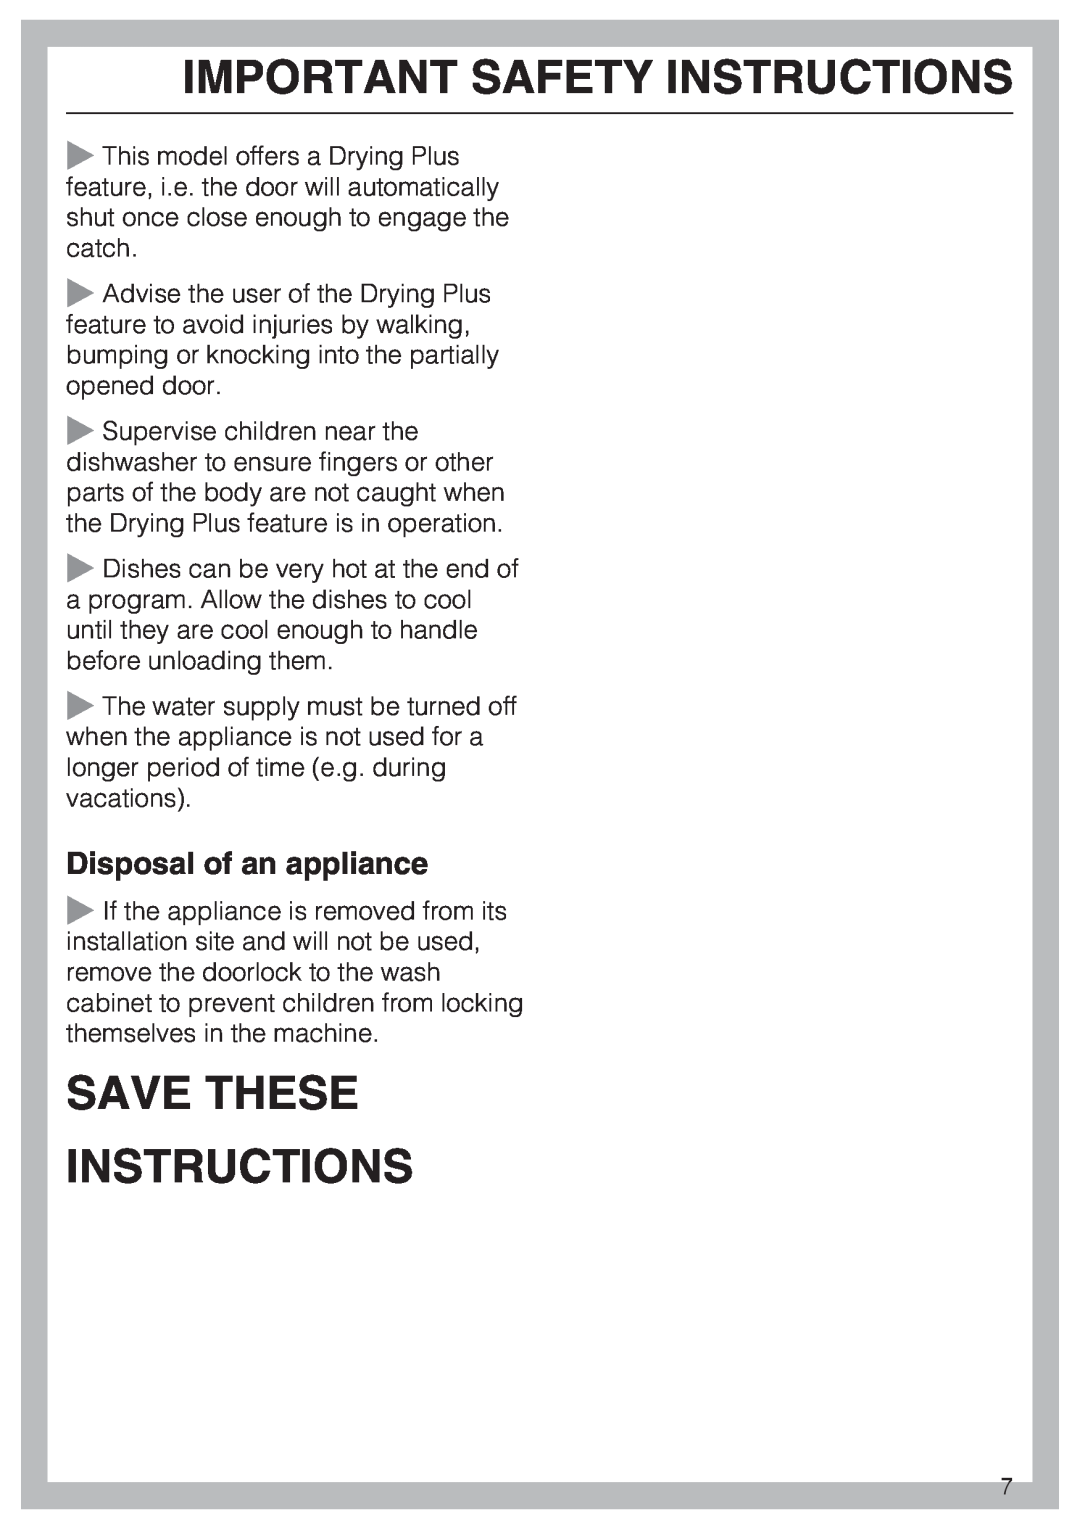 Miele G 5910, G 5915 operating instructions Save These Instructions, Disposal of an appliance, Important Safety Instructions 